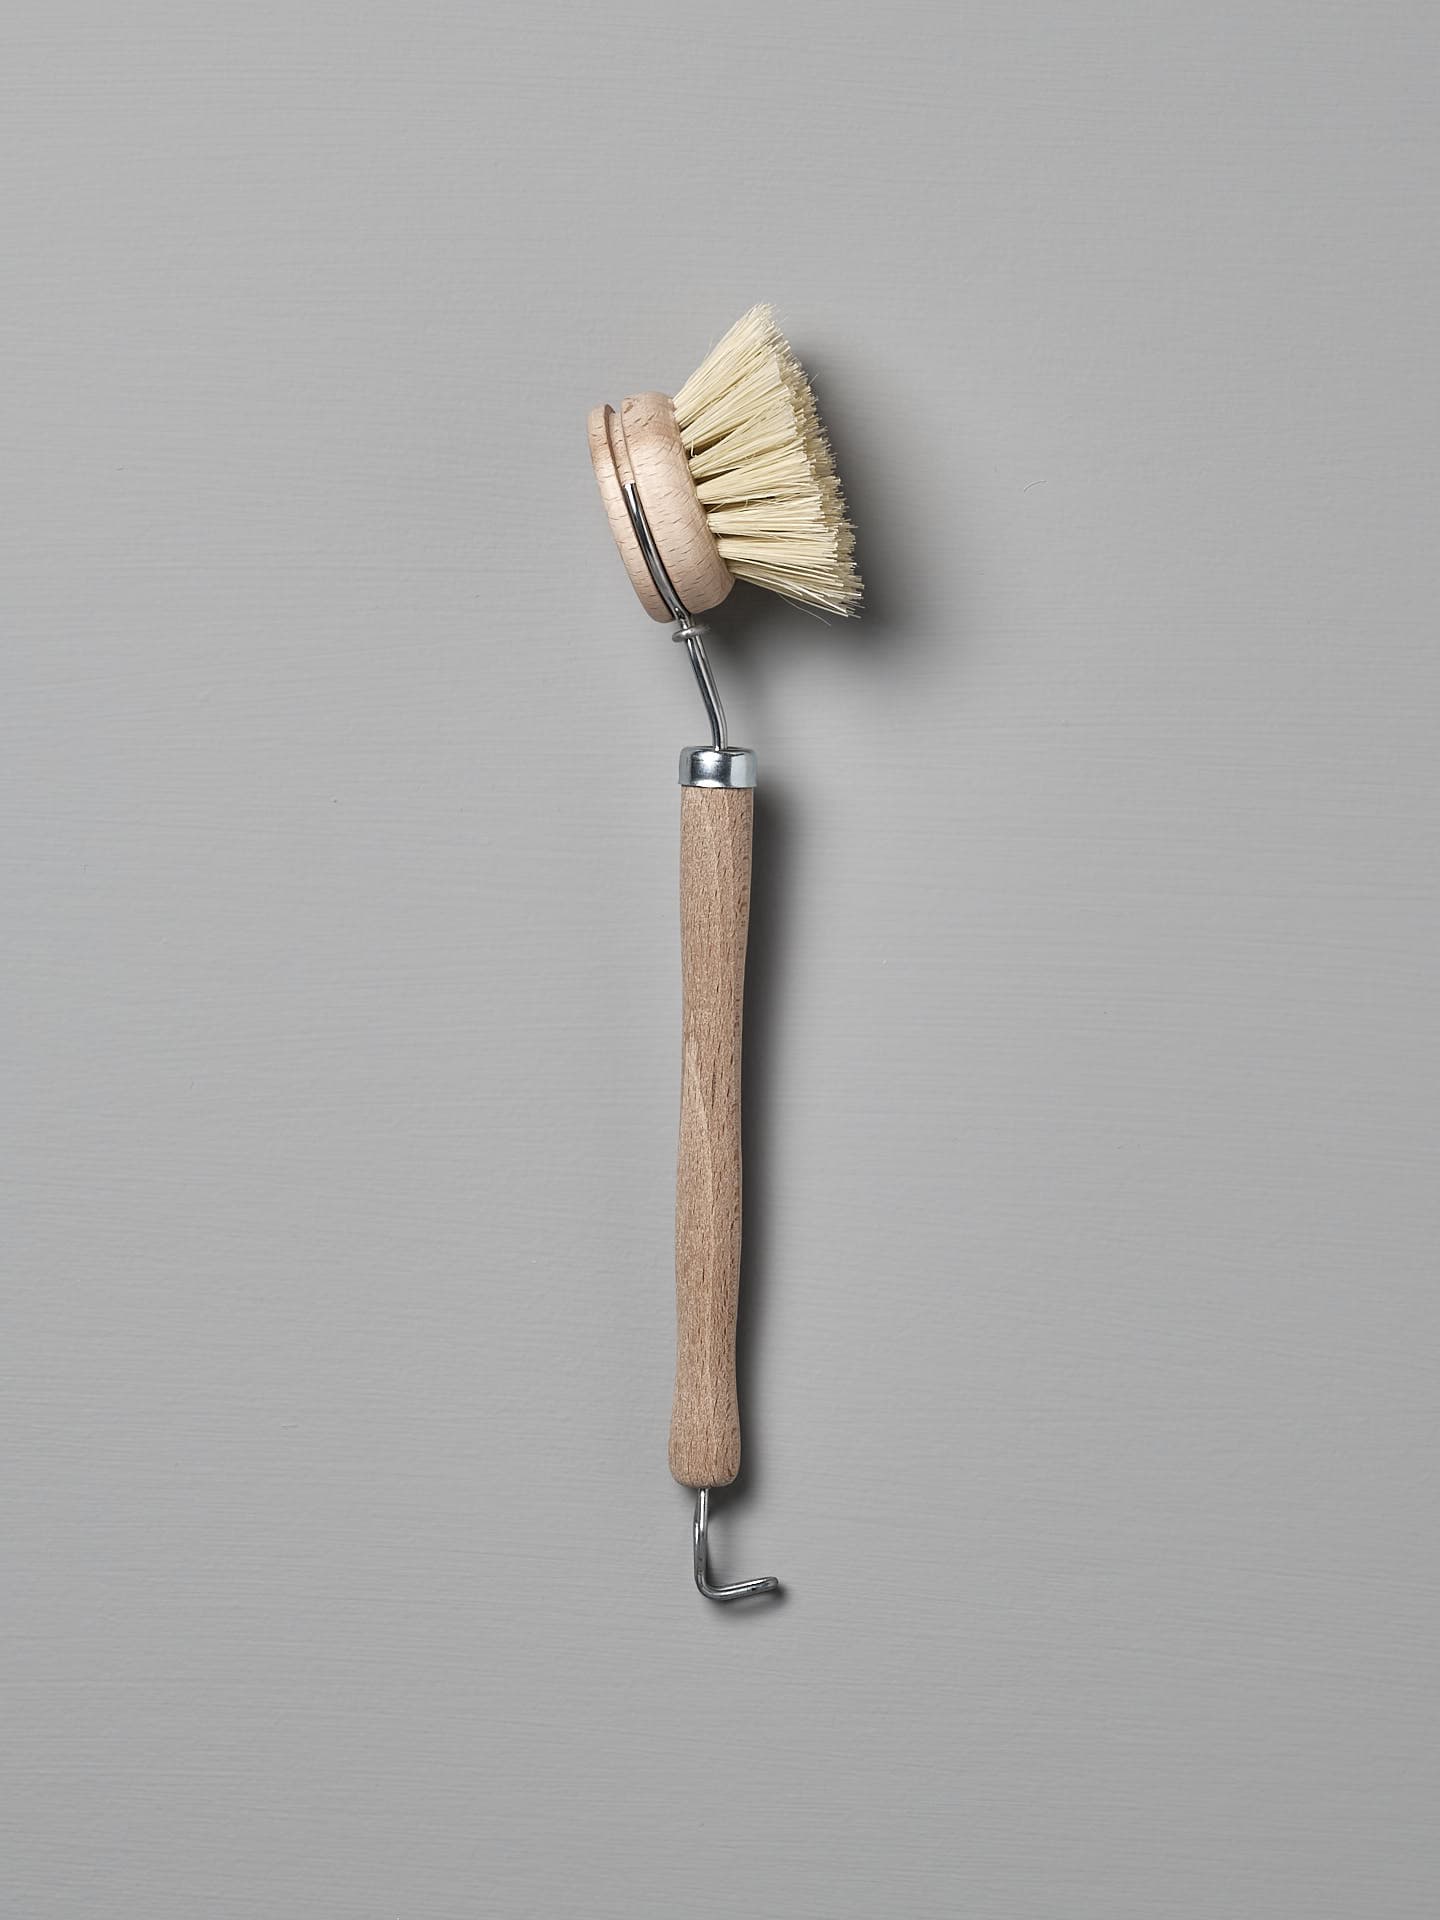 Iris Hantverk's Dish Brush with Replaceable Head, featuring a rounded head and stiff Tampico fibre bristles, along with a long handle and metal hook at the end, placed against a grey background.